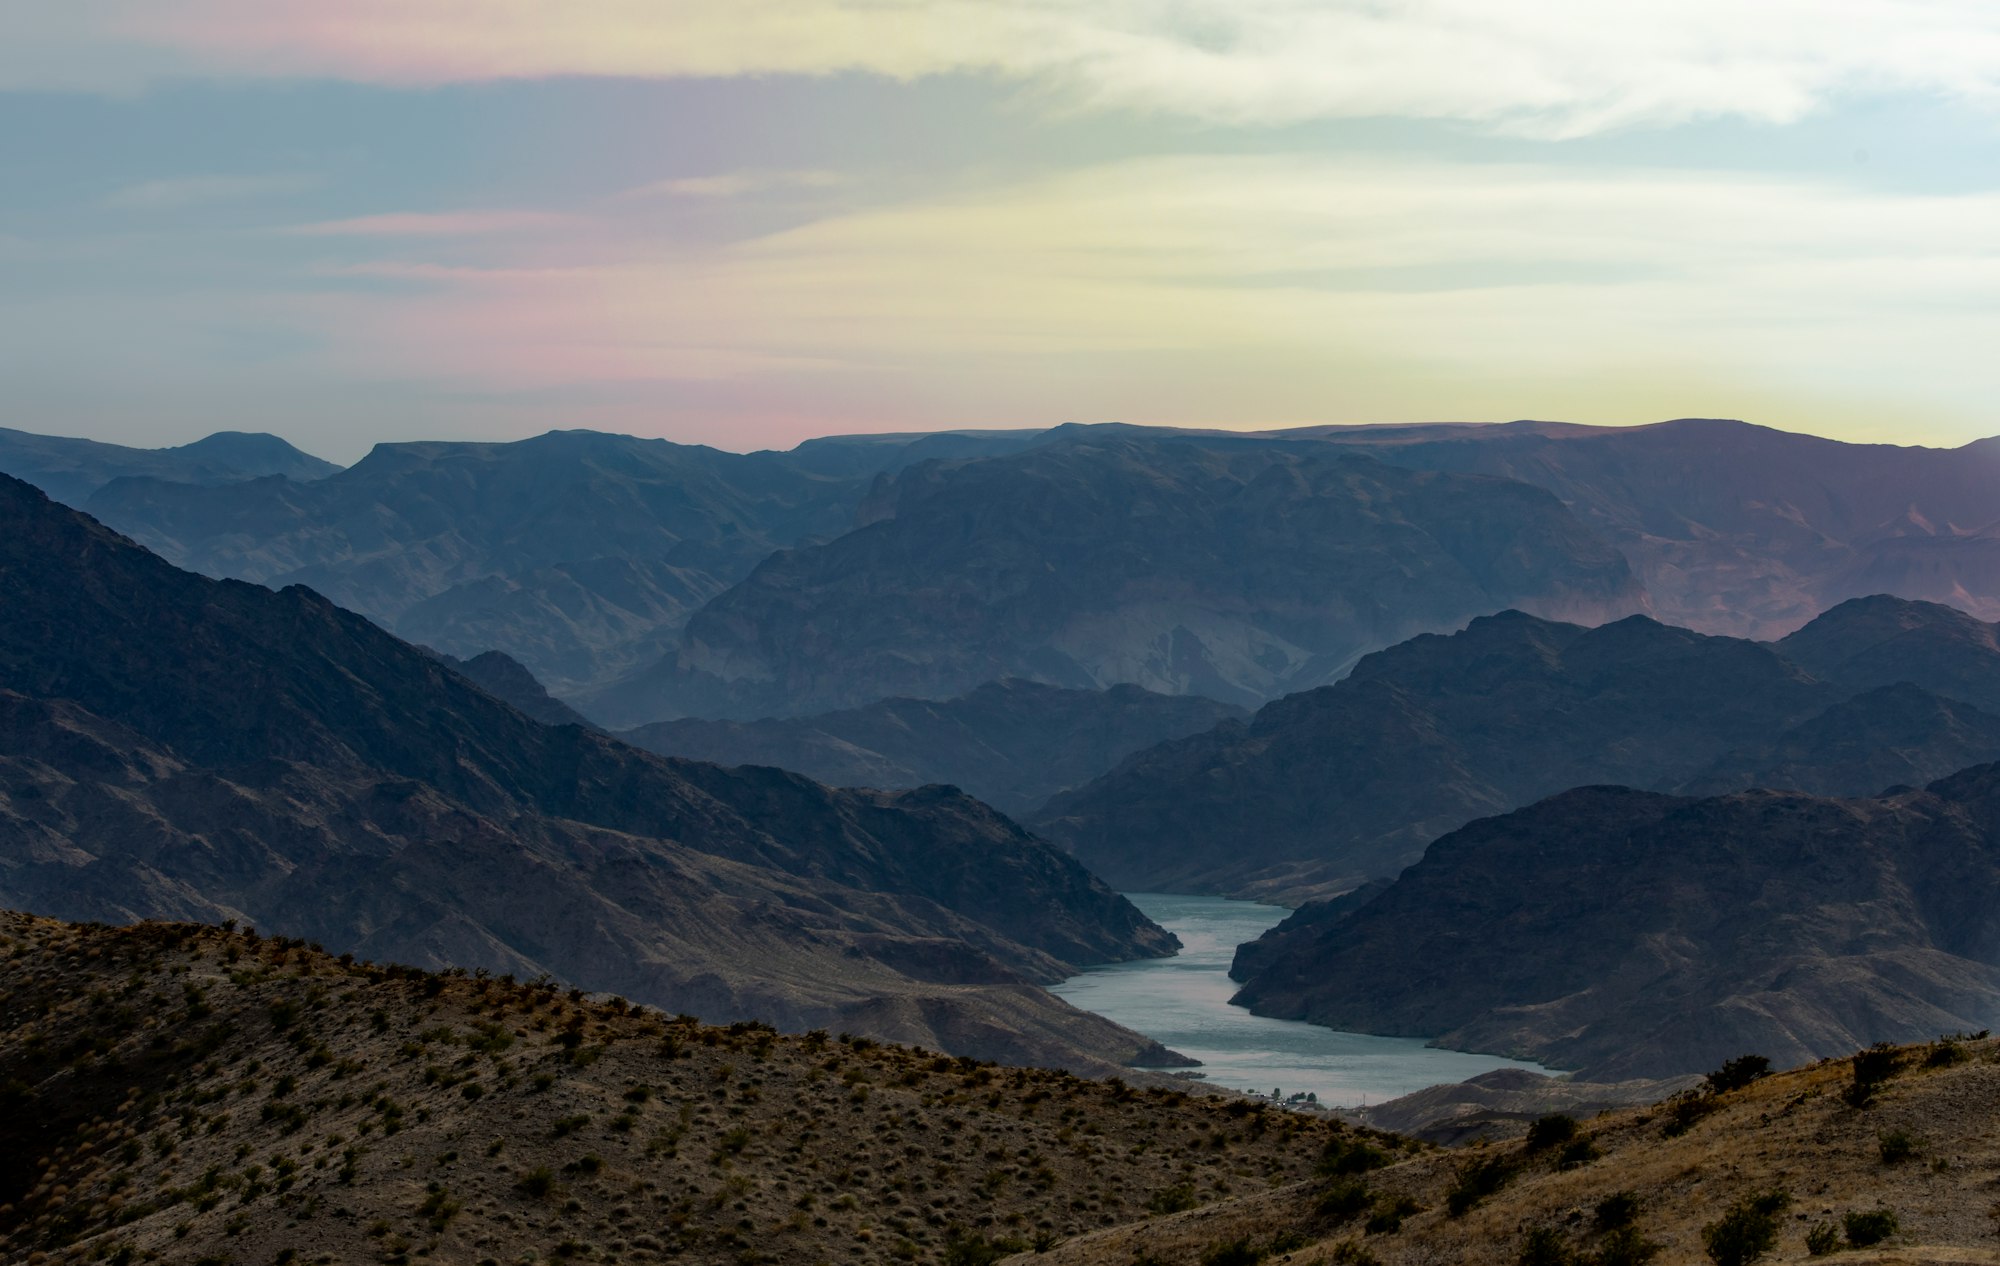 Historic Drought Forces Federal Restrictions on Colorado River